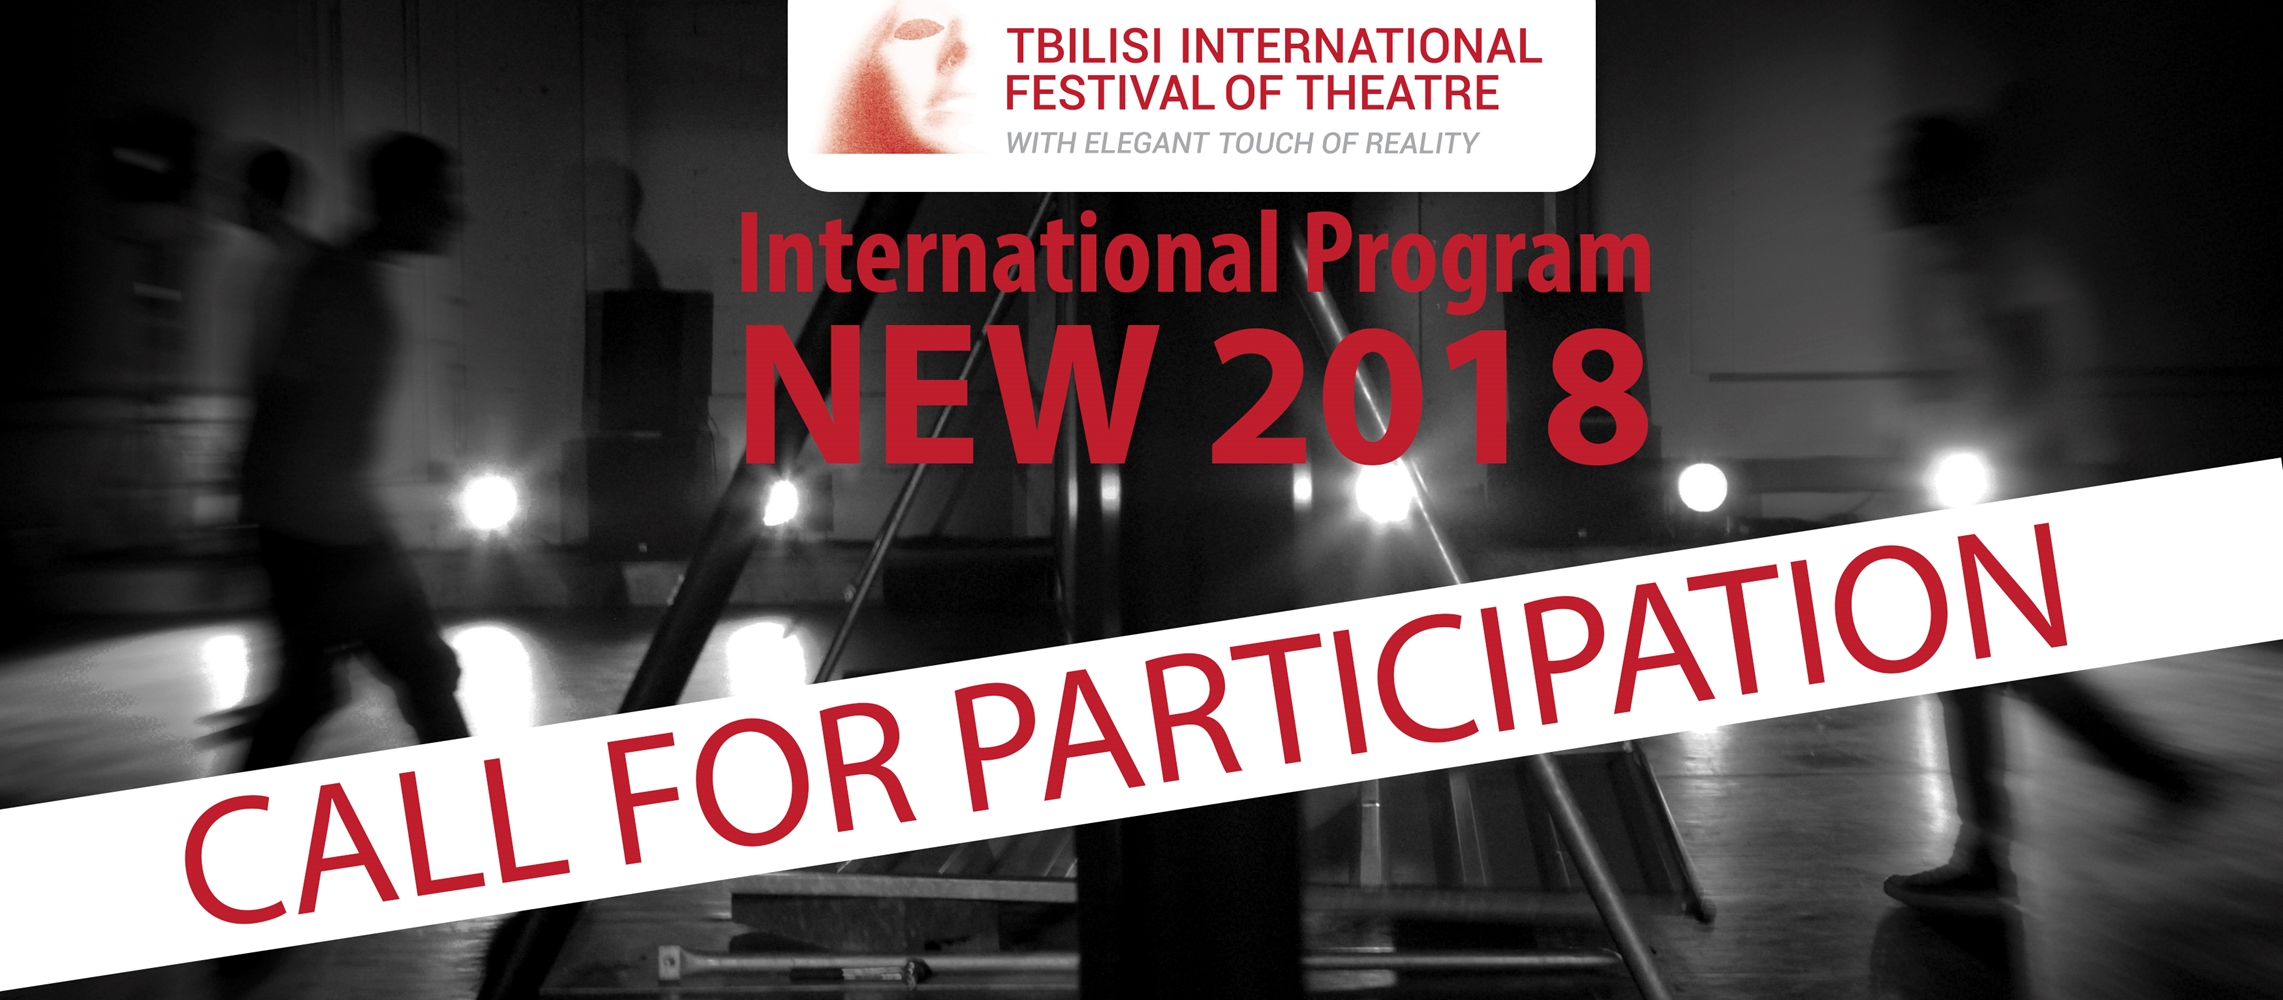 Tbilisi International Festival of Theatre announces the call for participation! 